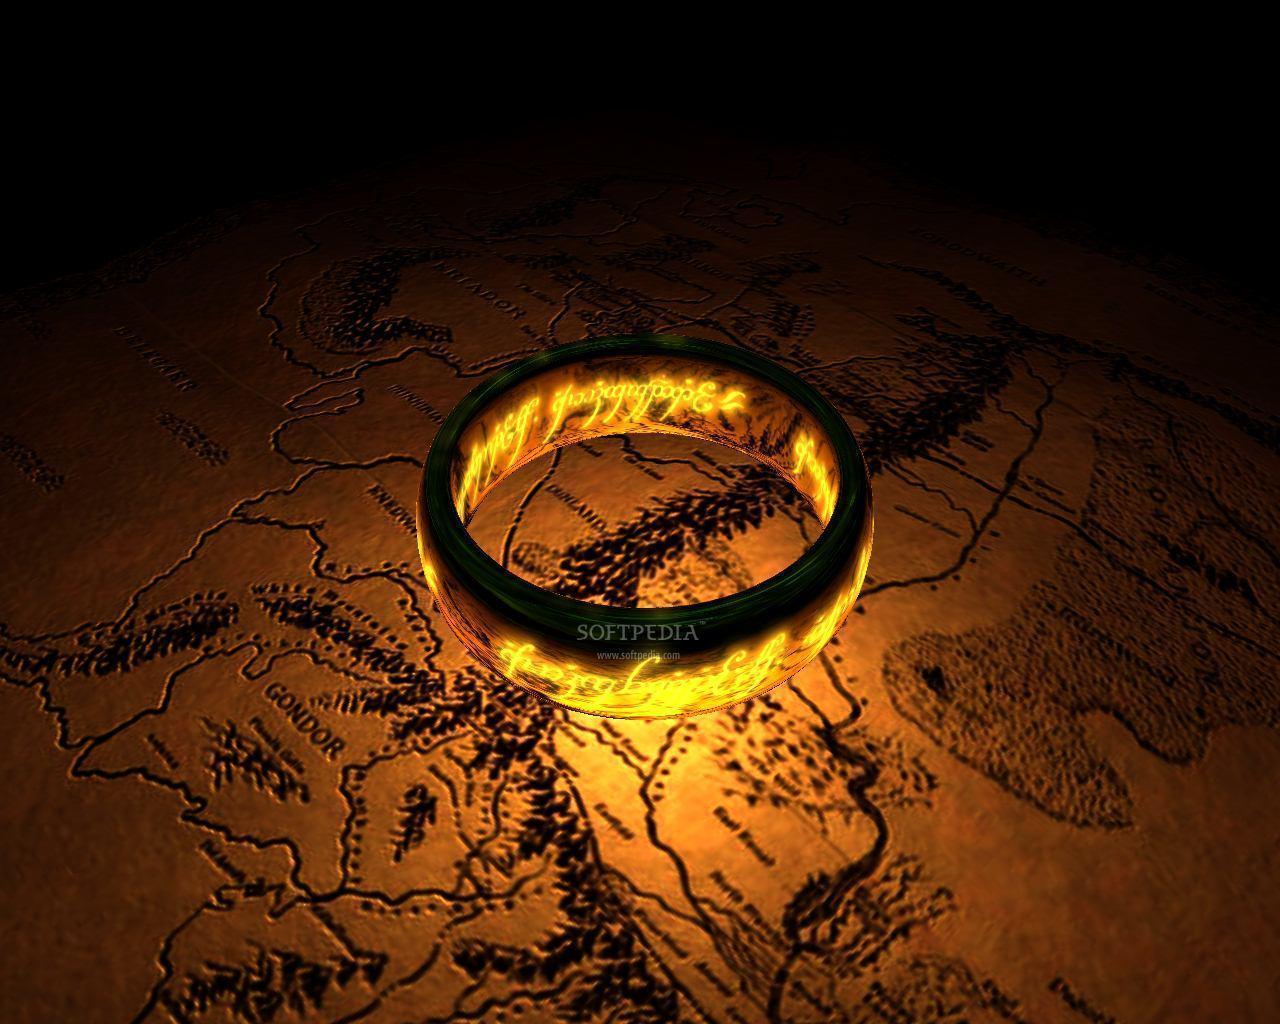 Lord Of The Rings iPhone Wallpaper